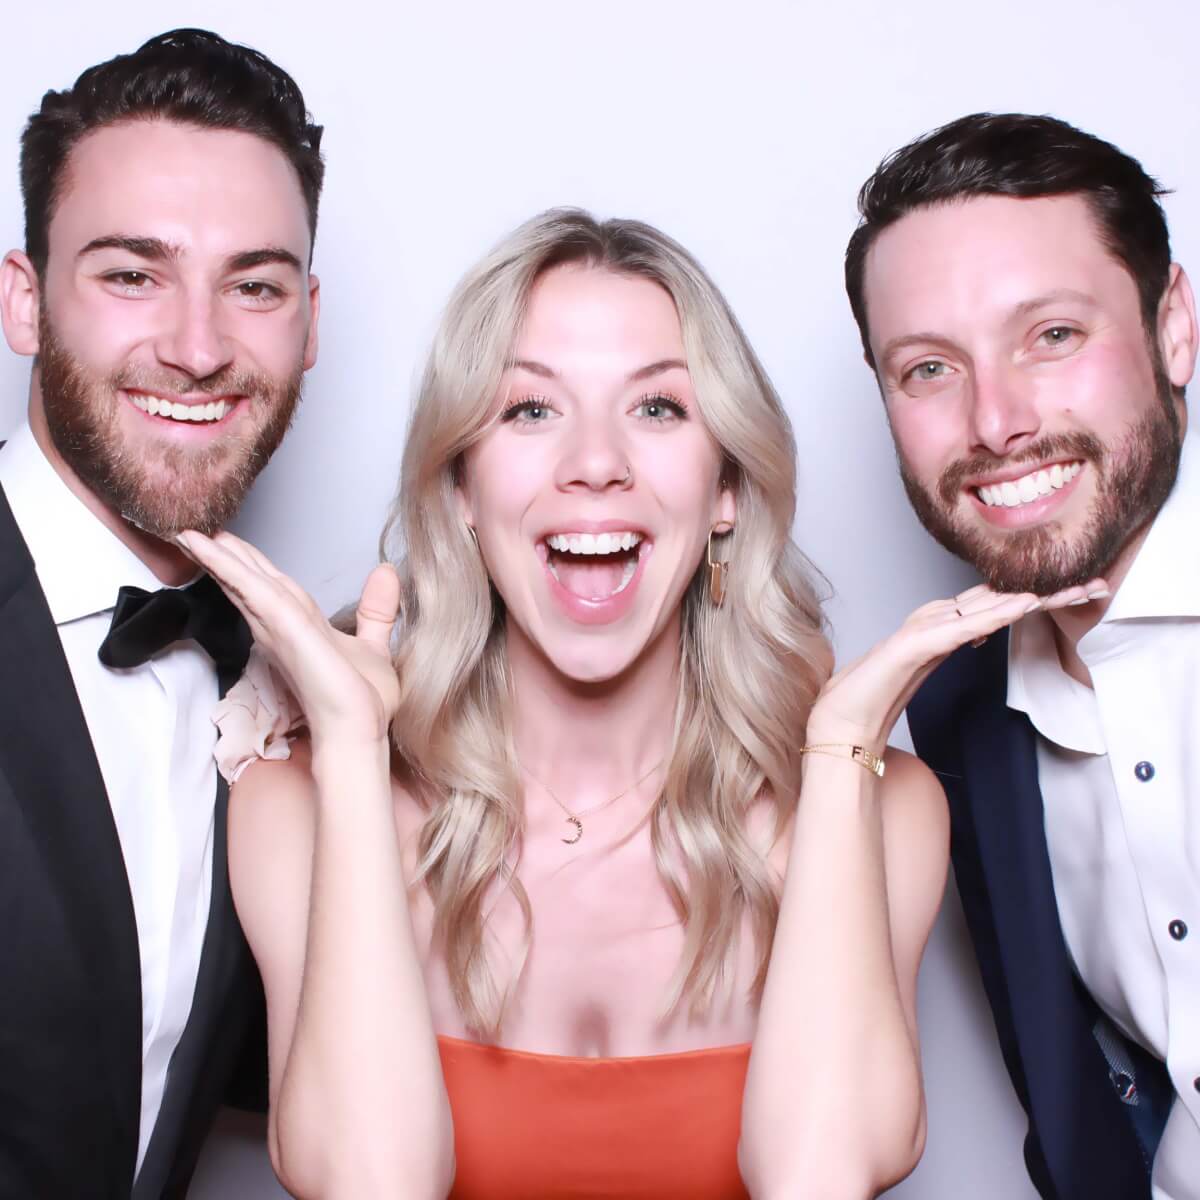 Wedding couple in Glam Photo Booth